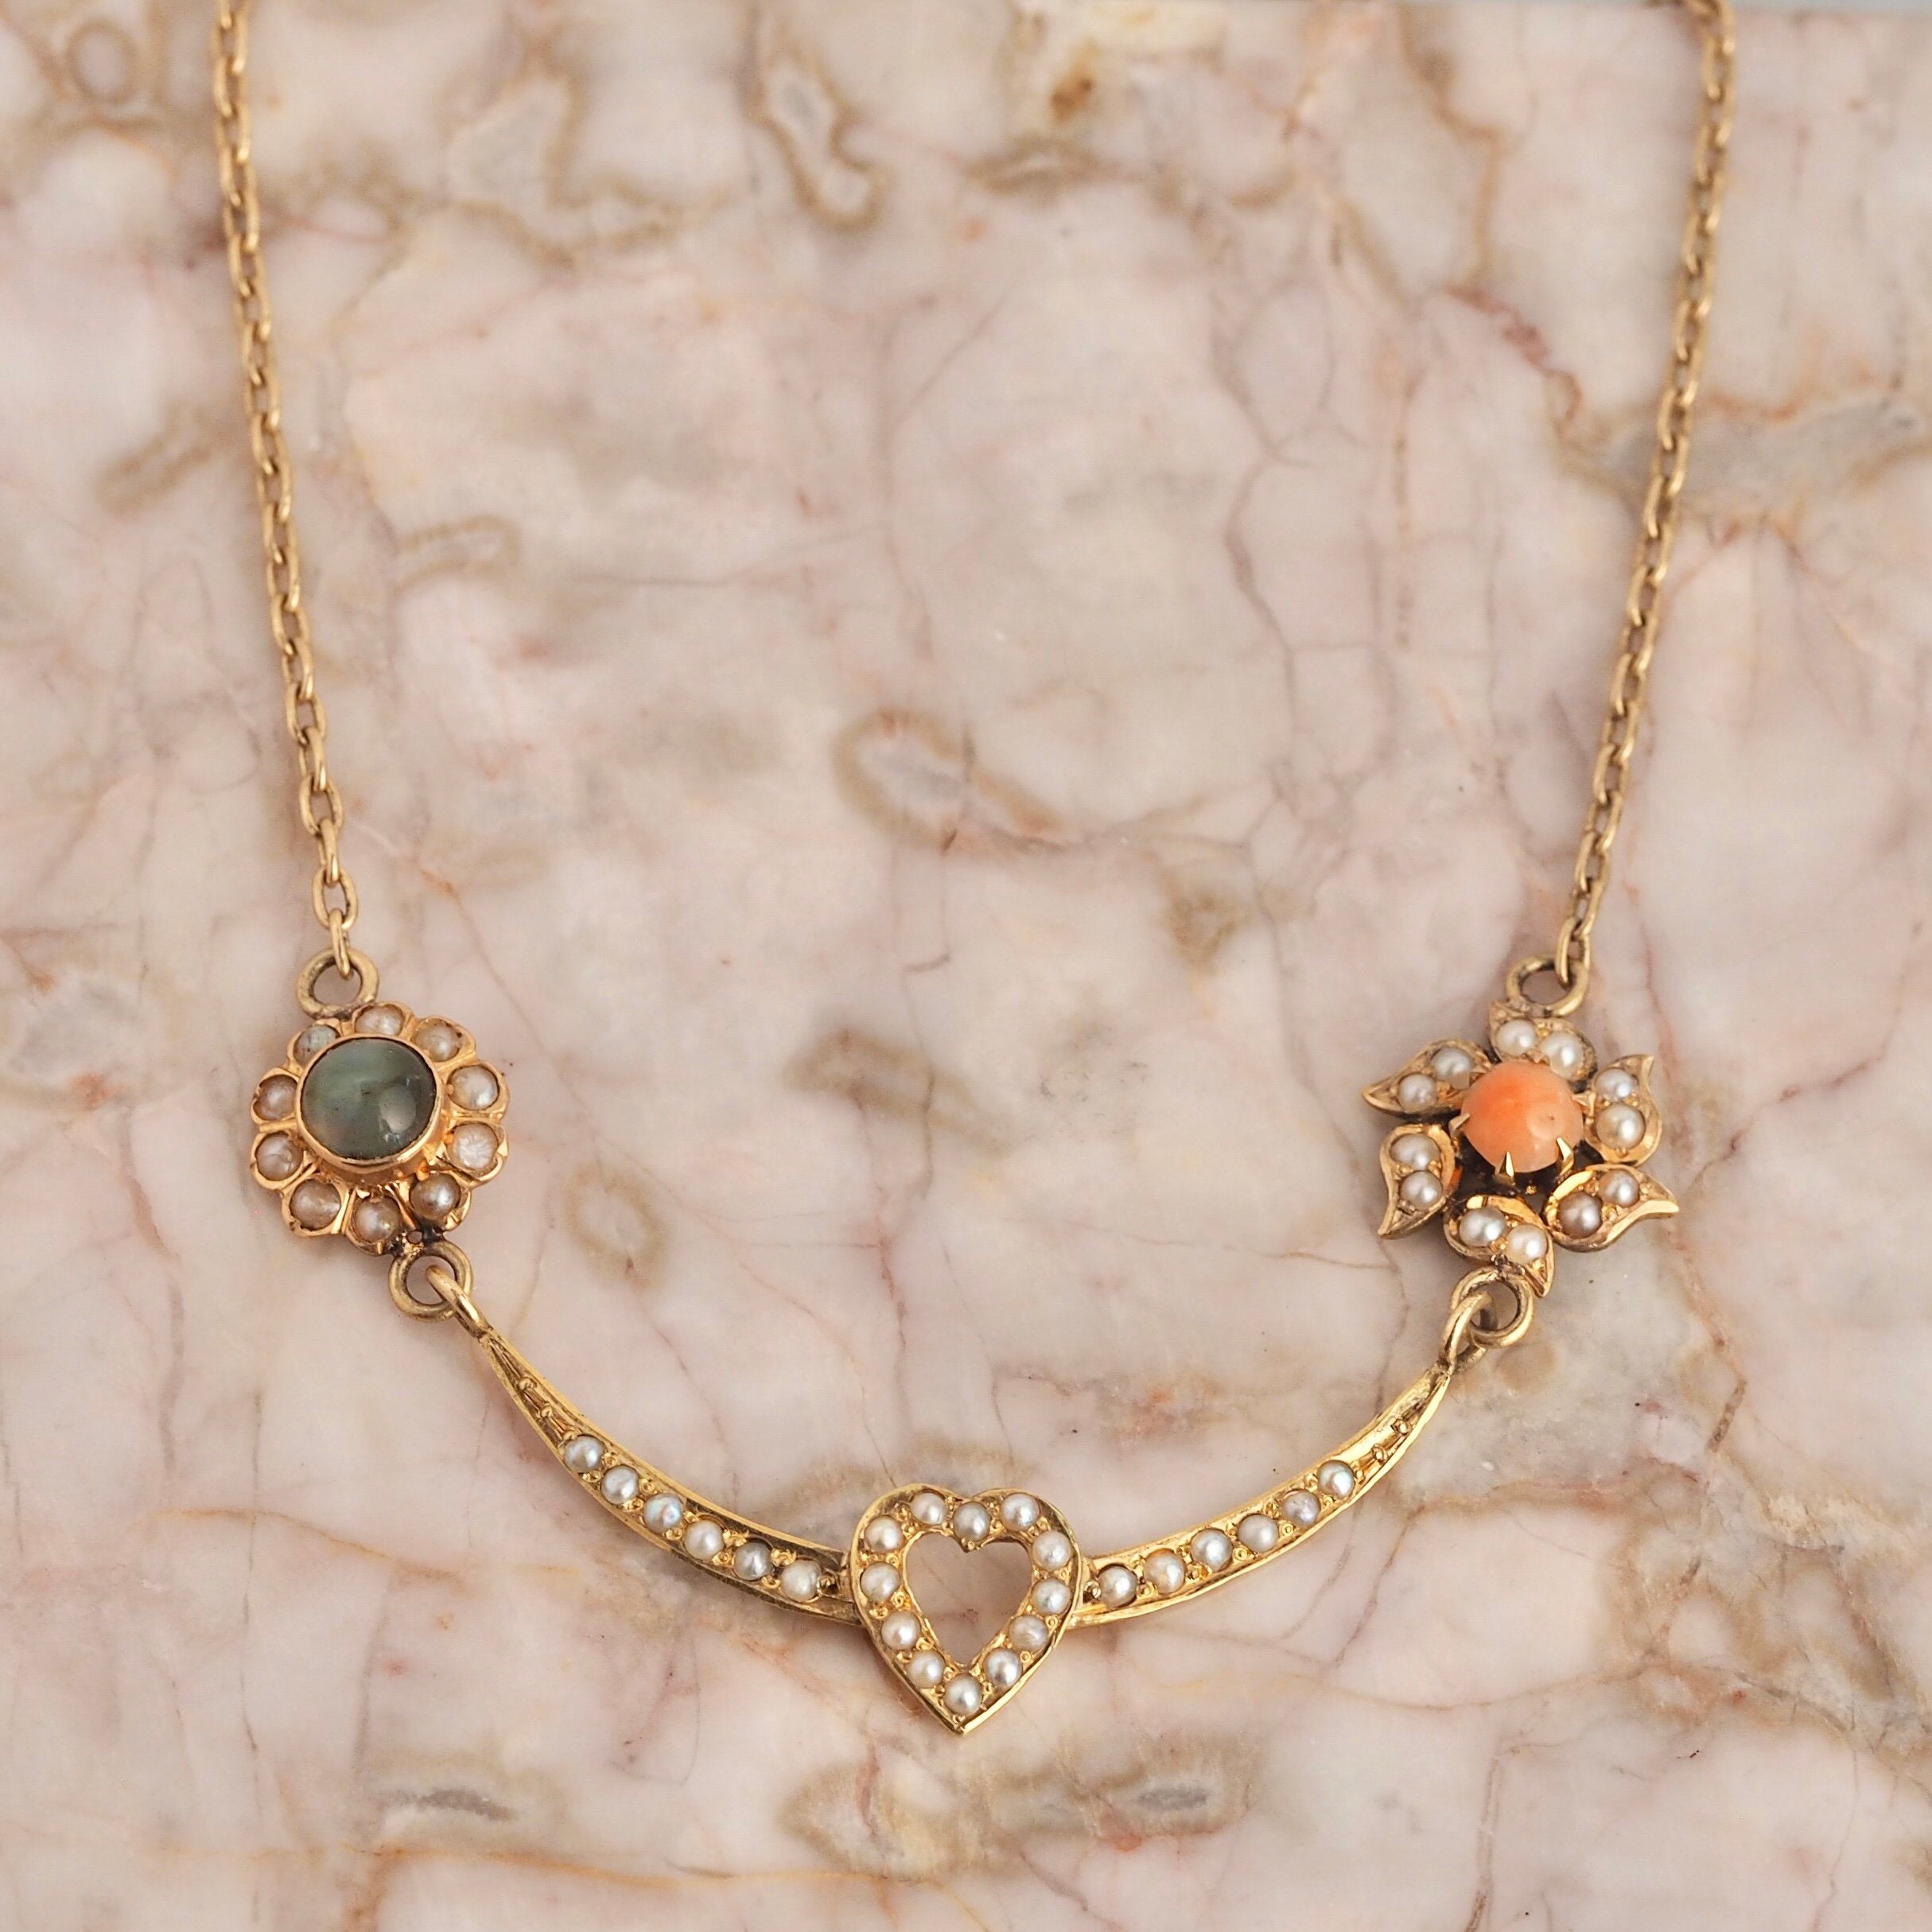 Antique Edwardian 14k Gold Coral, Chrysoberyl and Pearl Heart Necklace